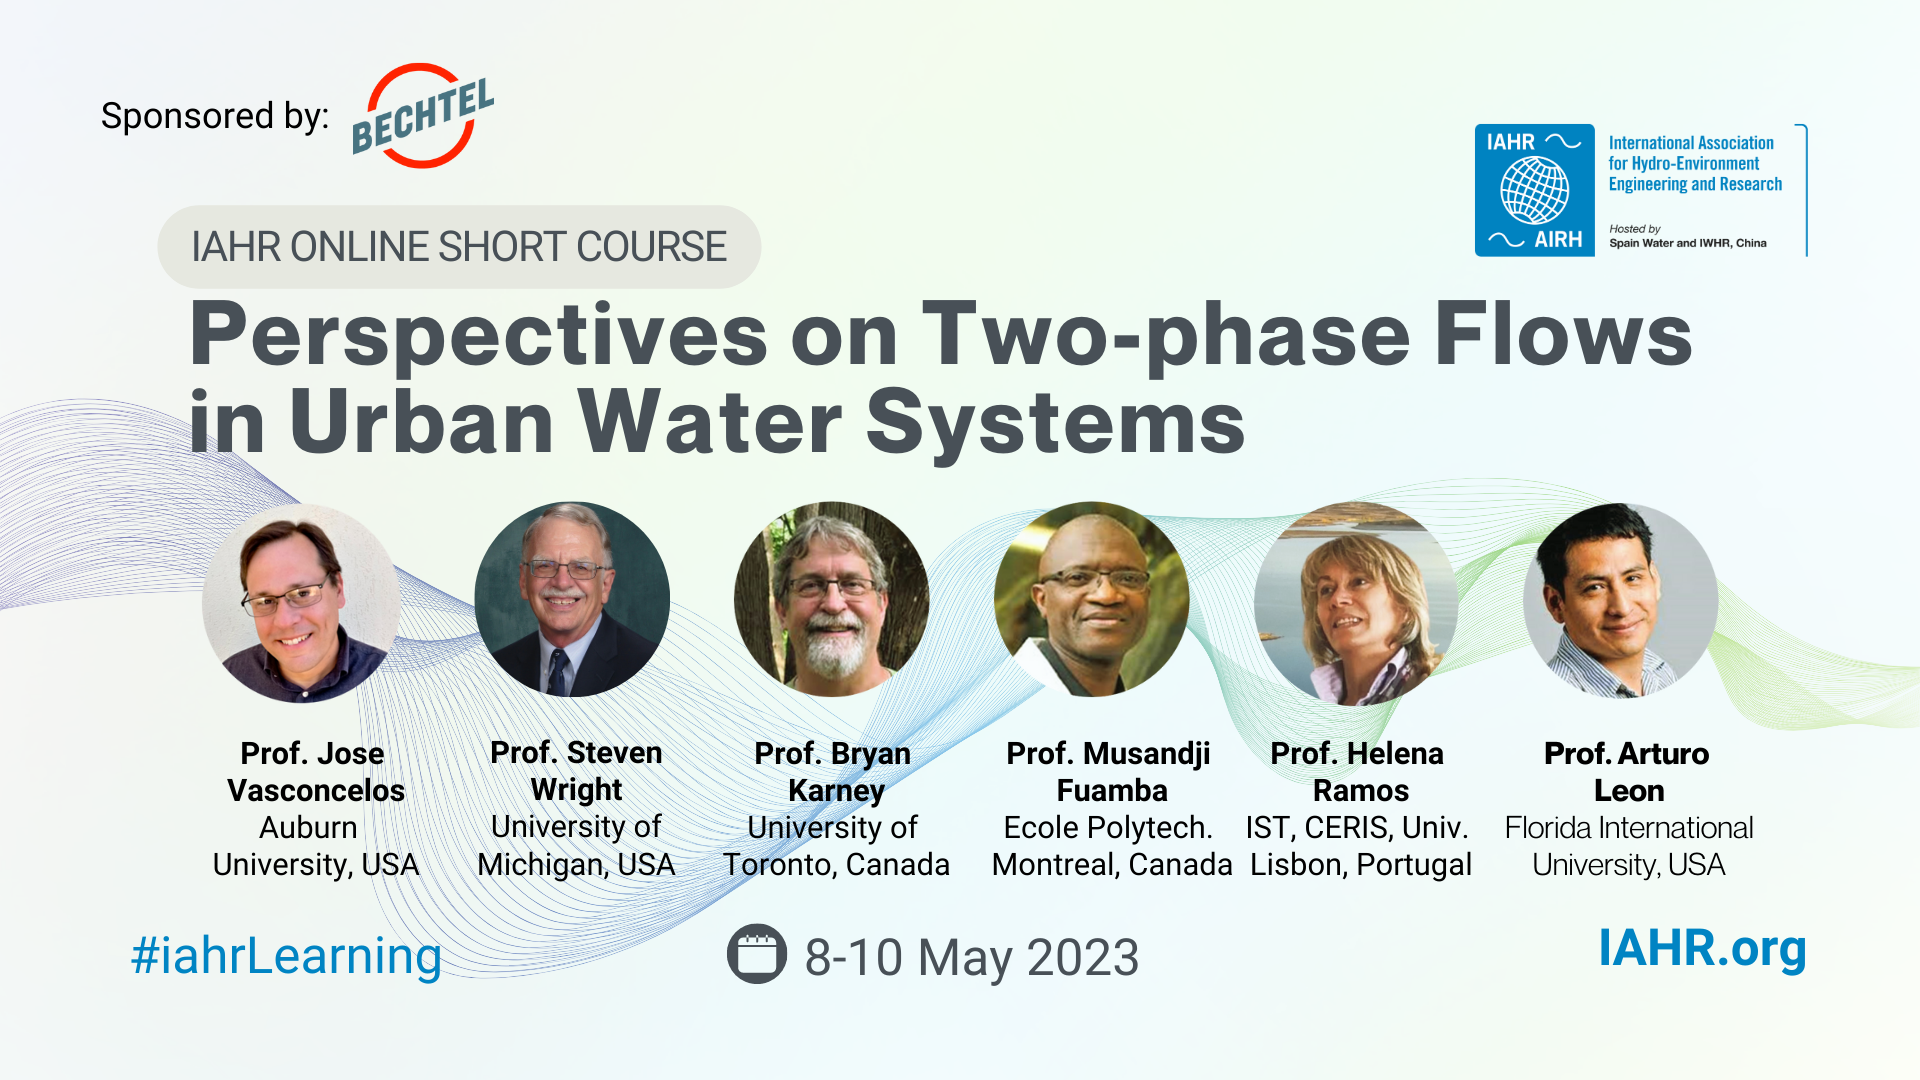 IAHR Online Short Course | Perspectives on Two-phase Flows in Urban Water Systems